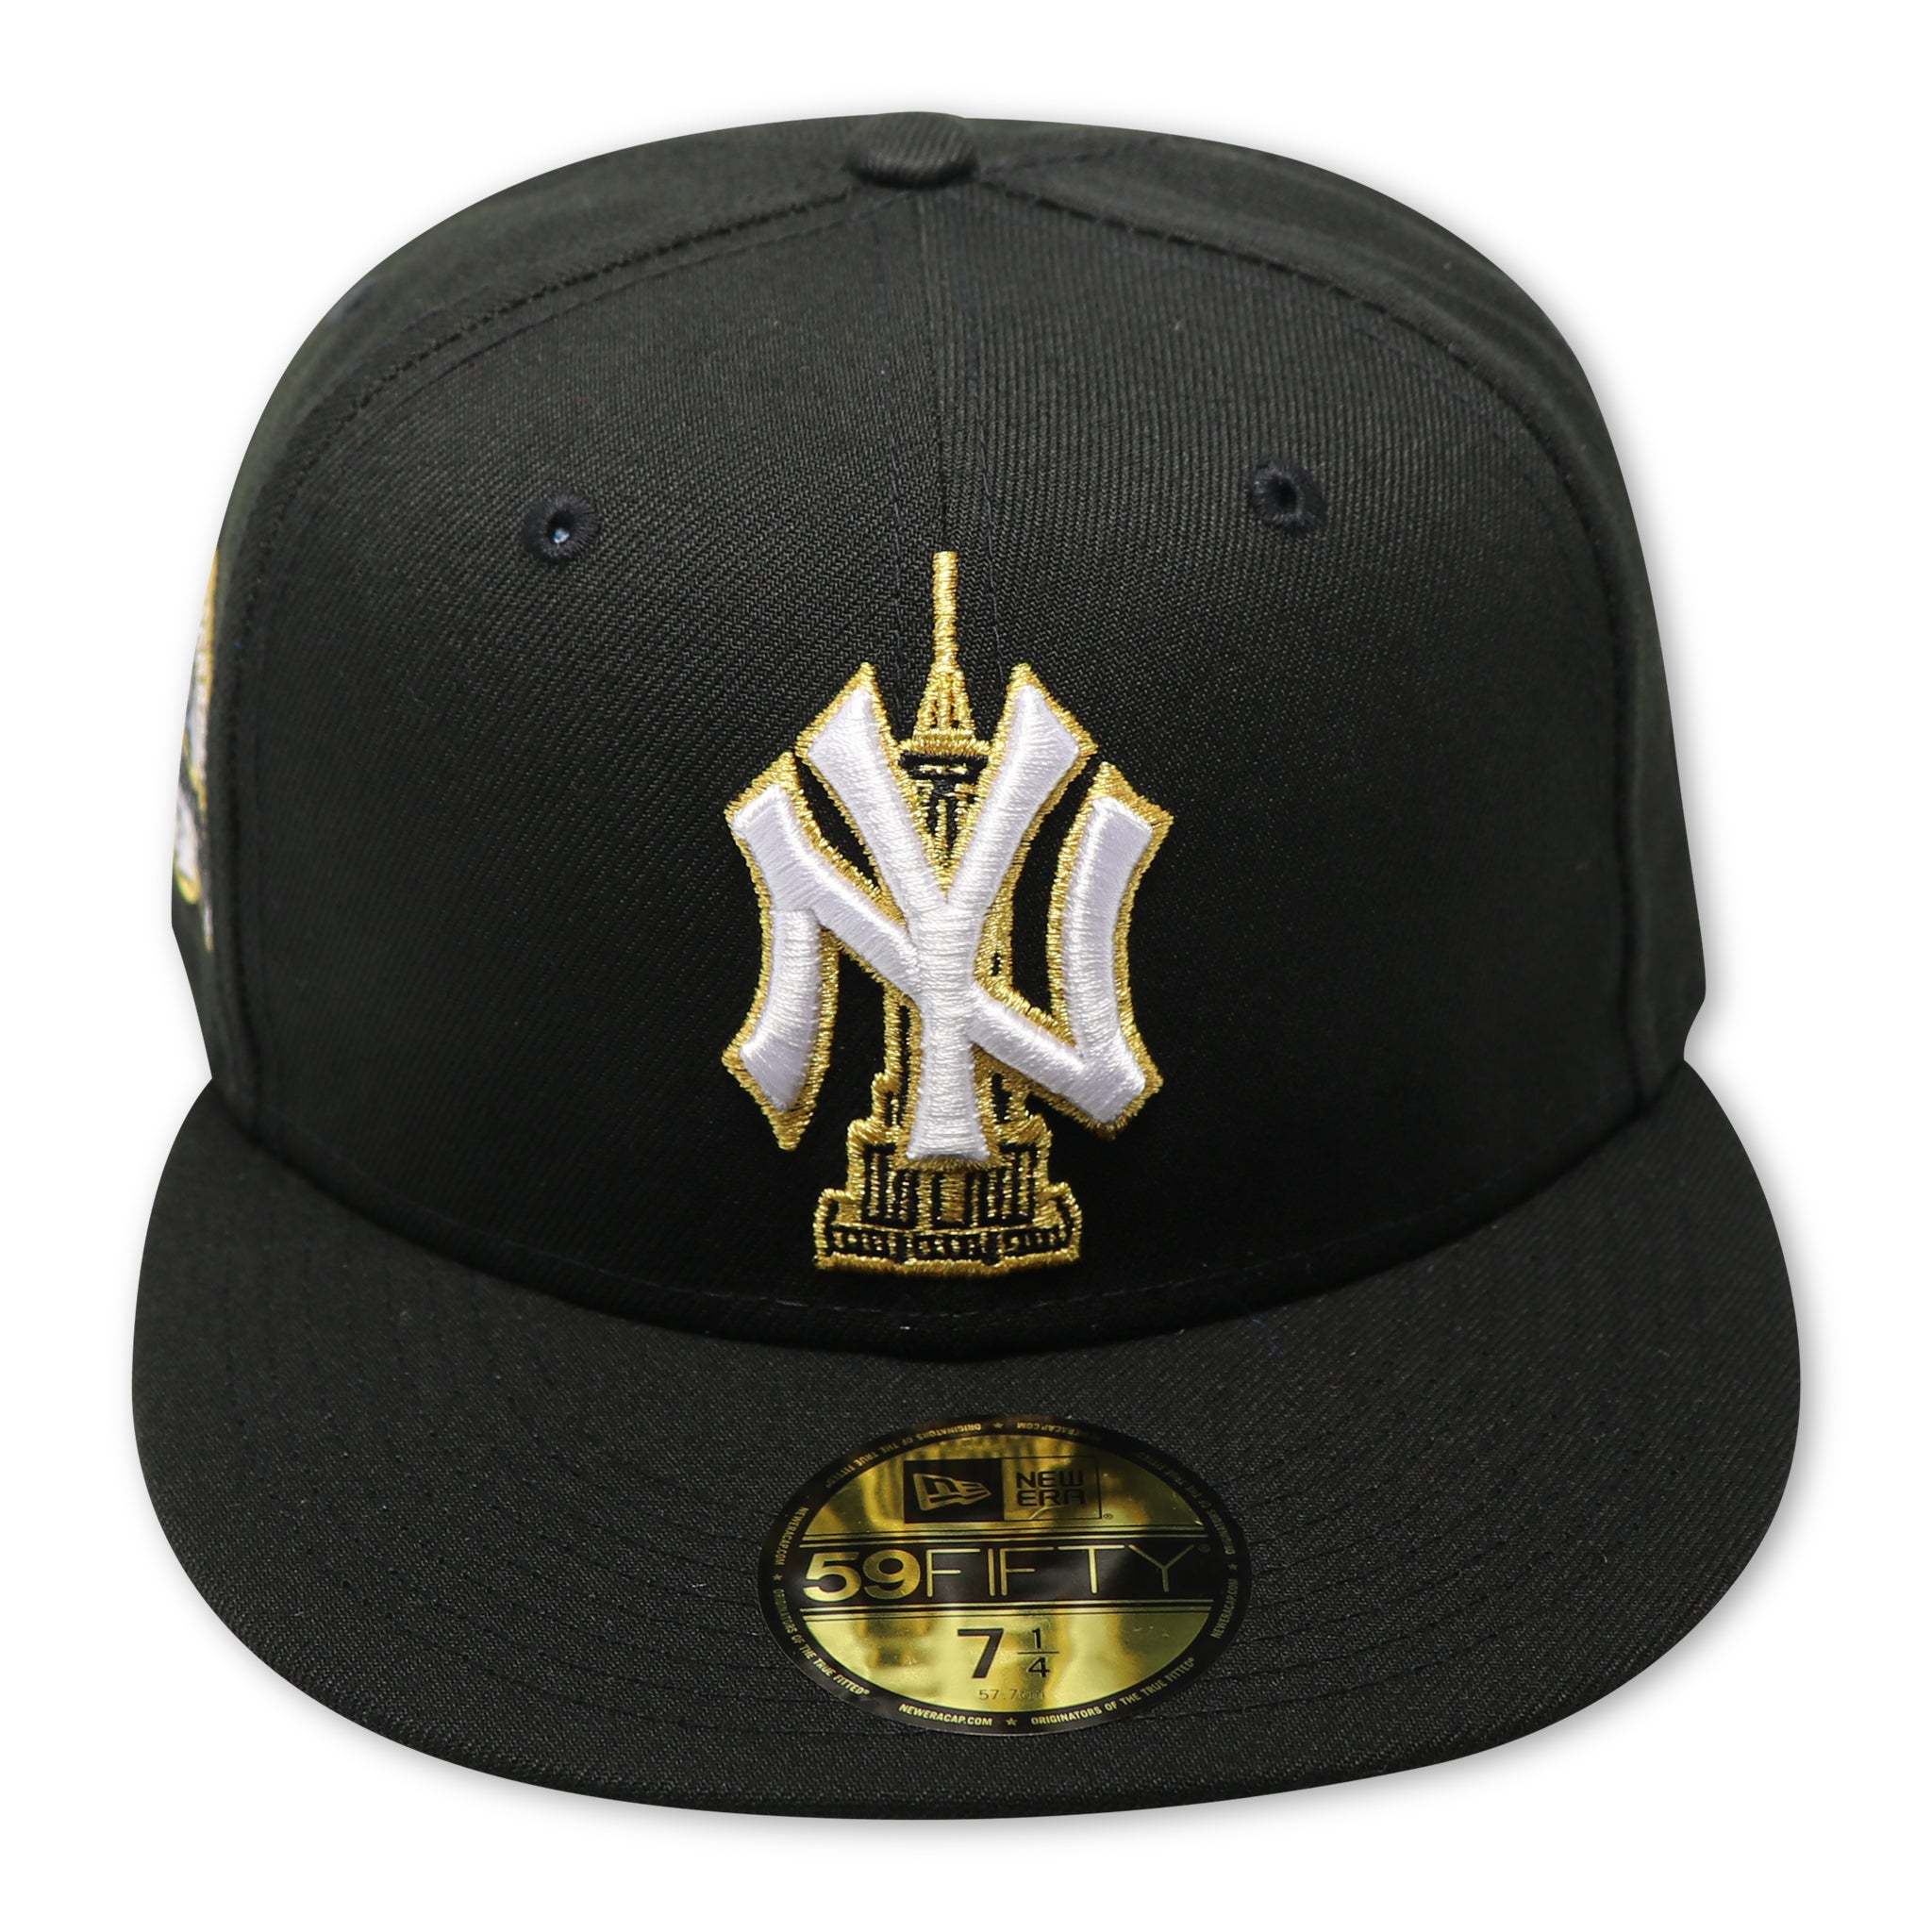 NEW YORK YANKEES (BLACK) (27X CHAMPS) "EMPIRE STATE" NEW ERA 59FIFTY FITTED (GOLD UNDER VISOR)